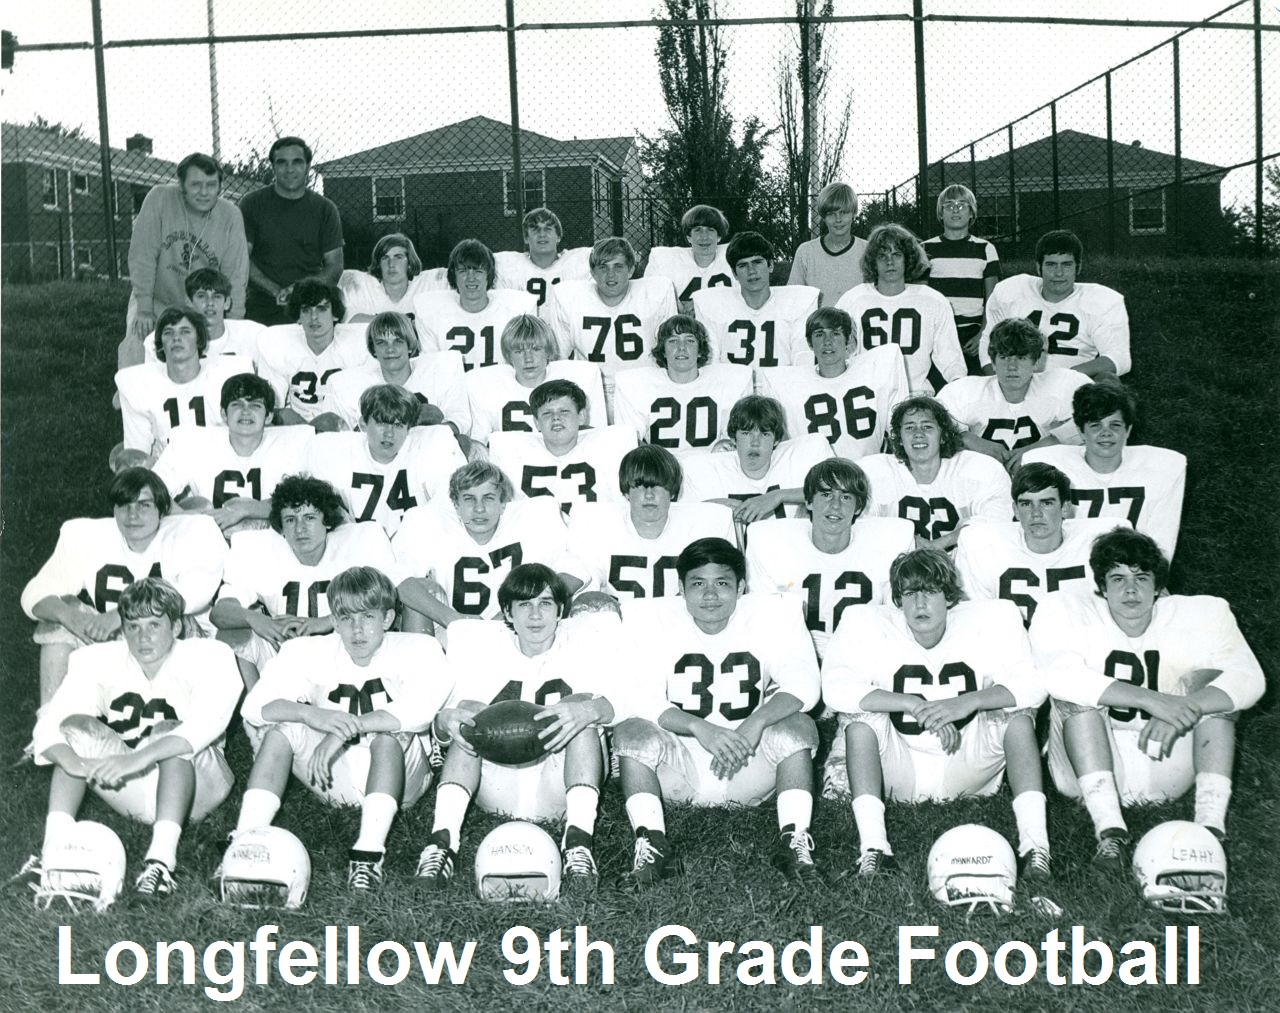 John Mathie's 9th Grade Undefeated unscored upon football team.